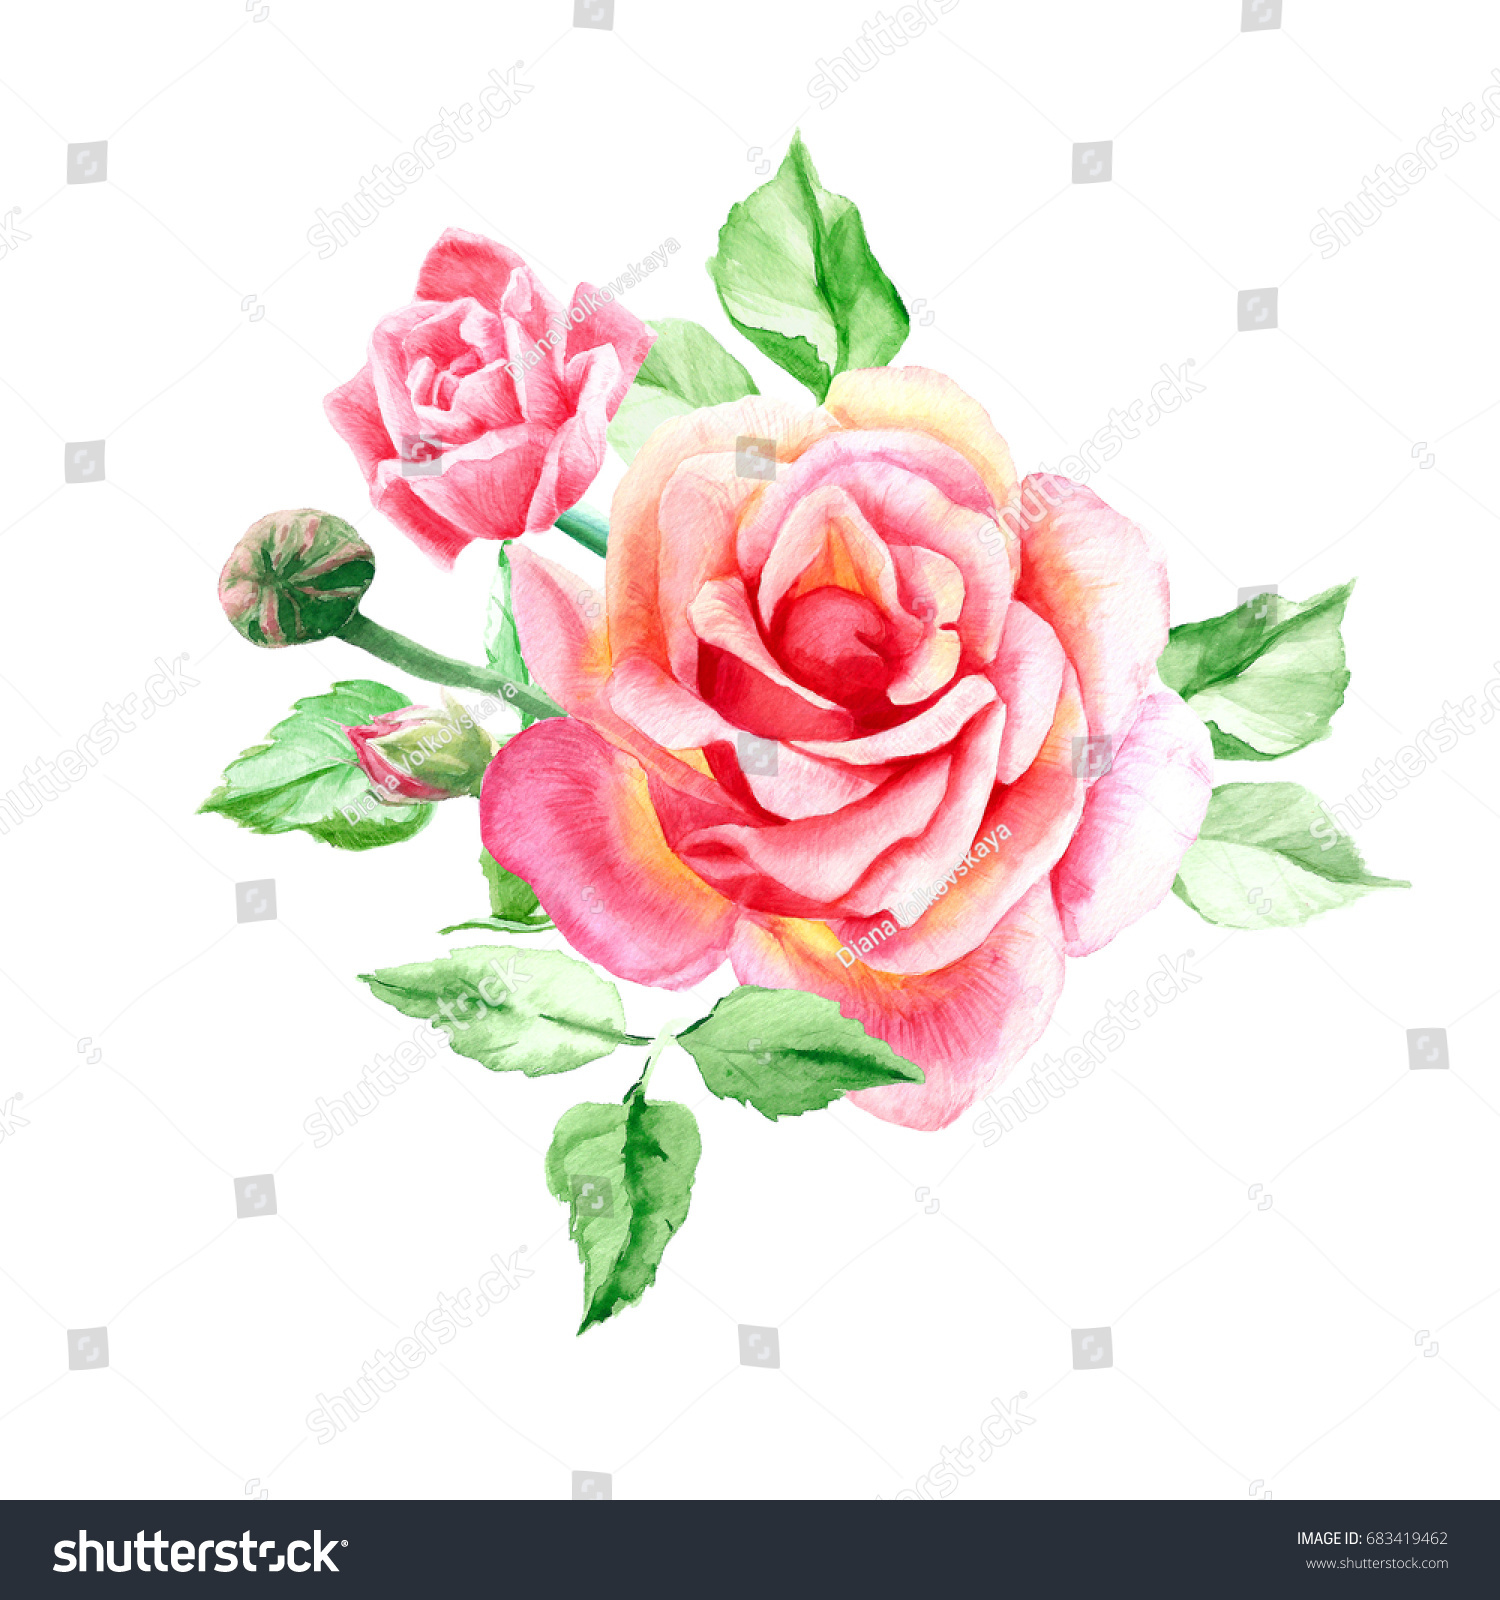 Two Pink Roses Buds Watercolor Painting Stock Illustration 683419462 ...